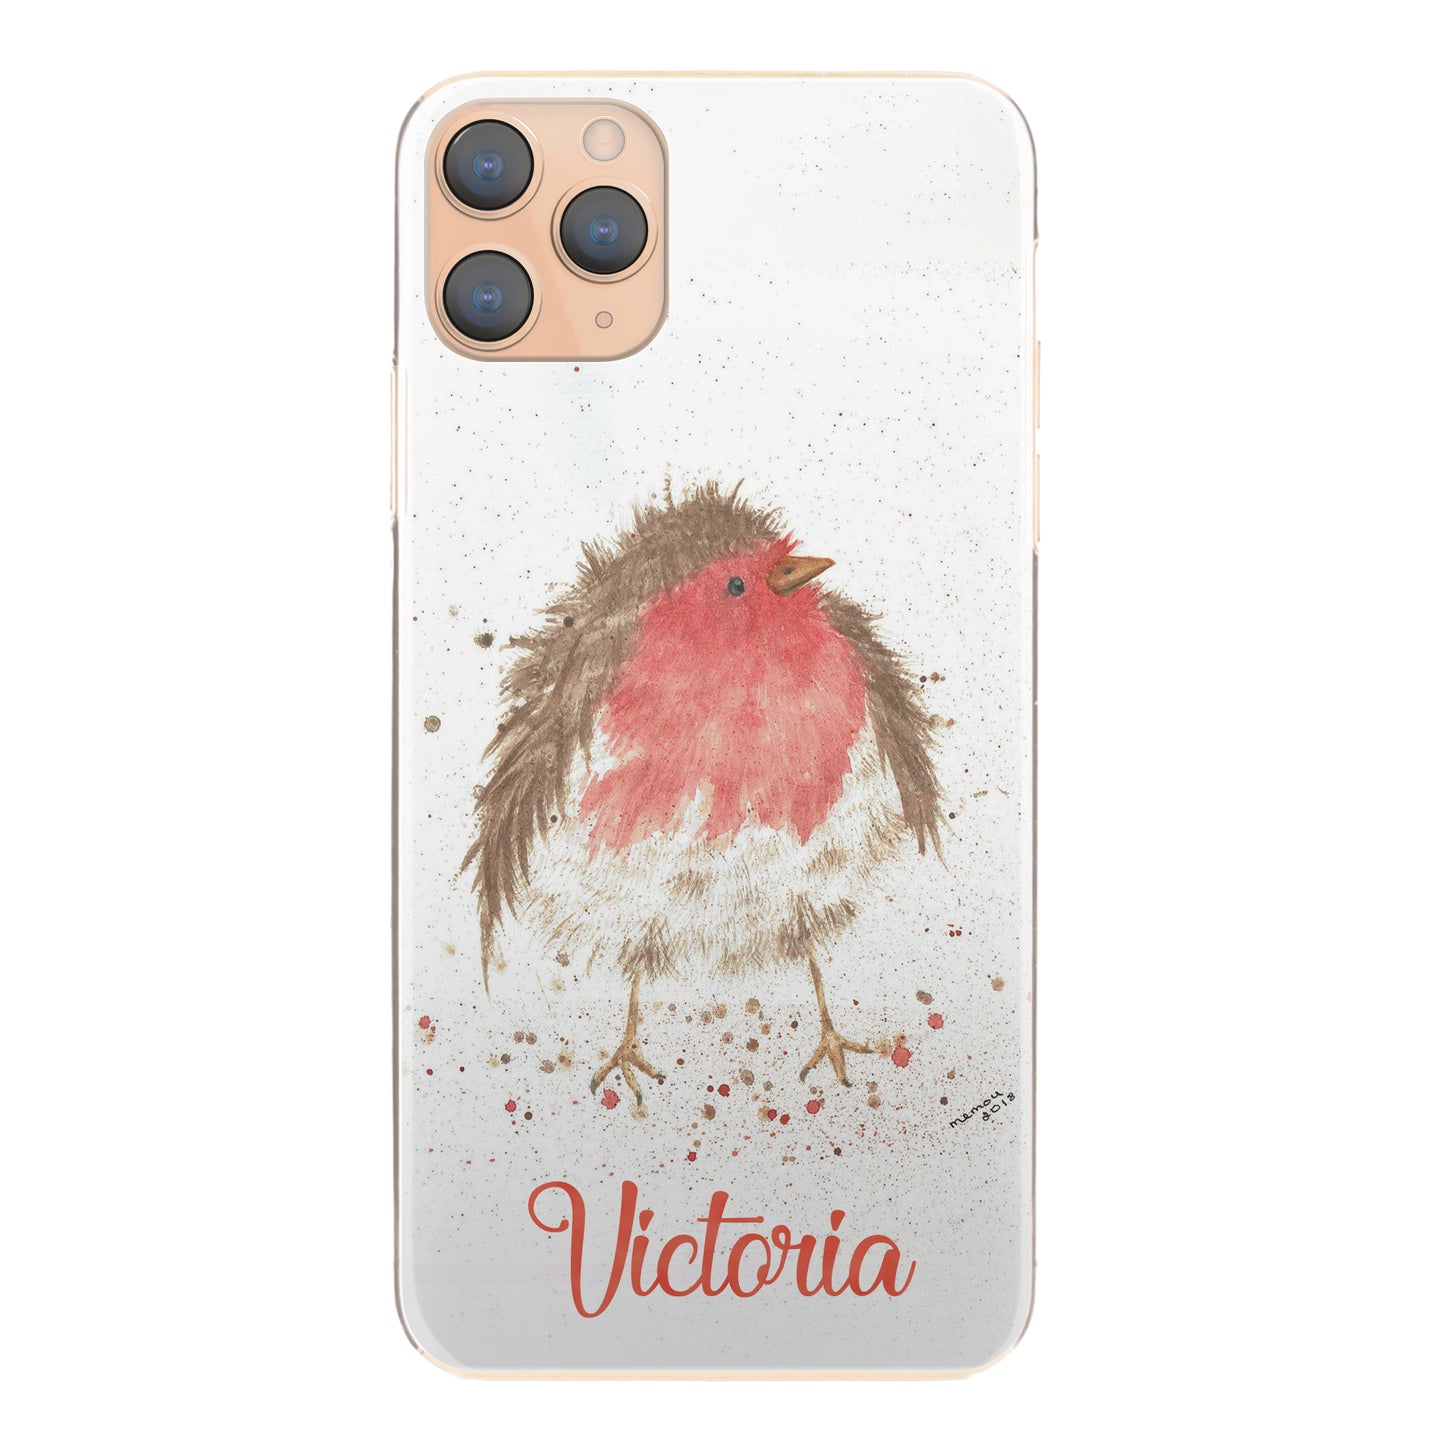 Personalised Sony Phone Hard Case with Speckled Robin and Red Text